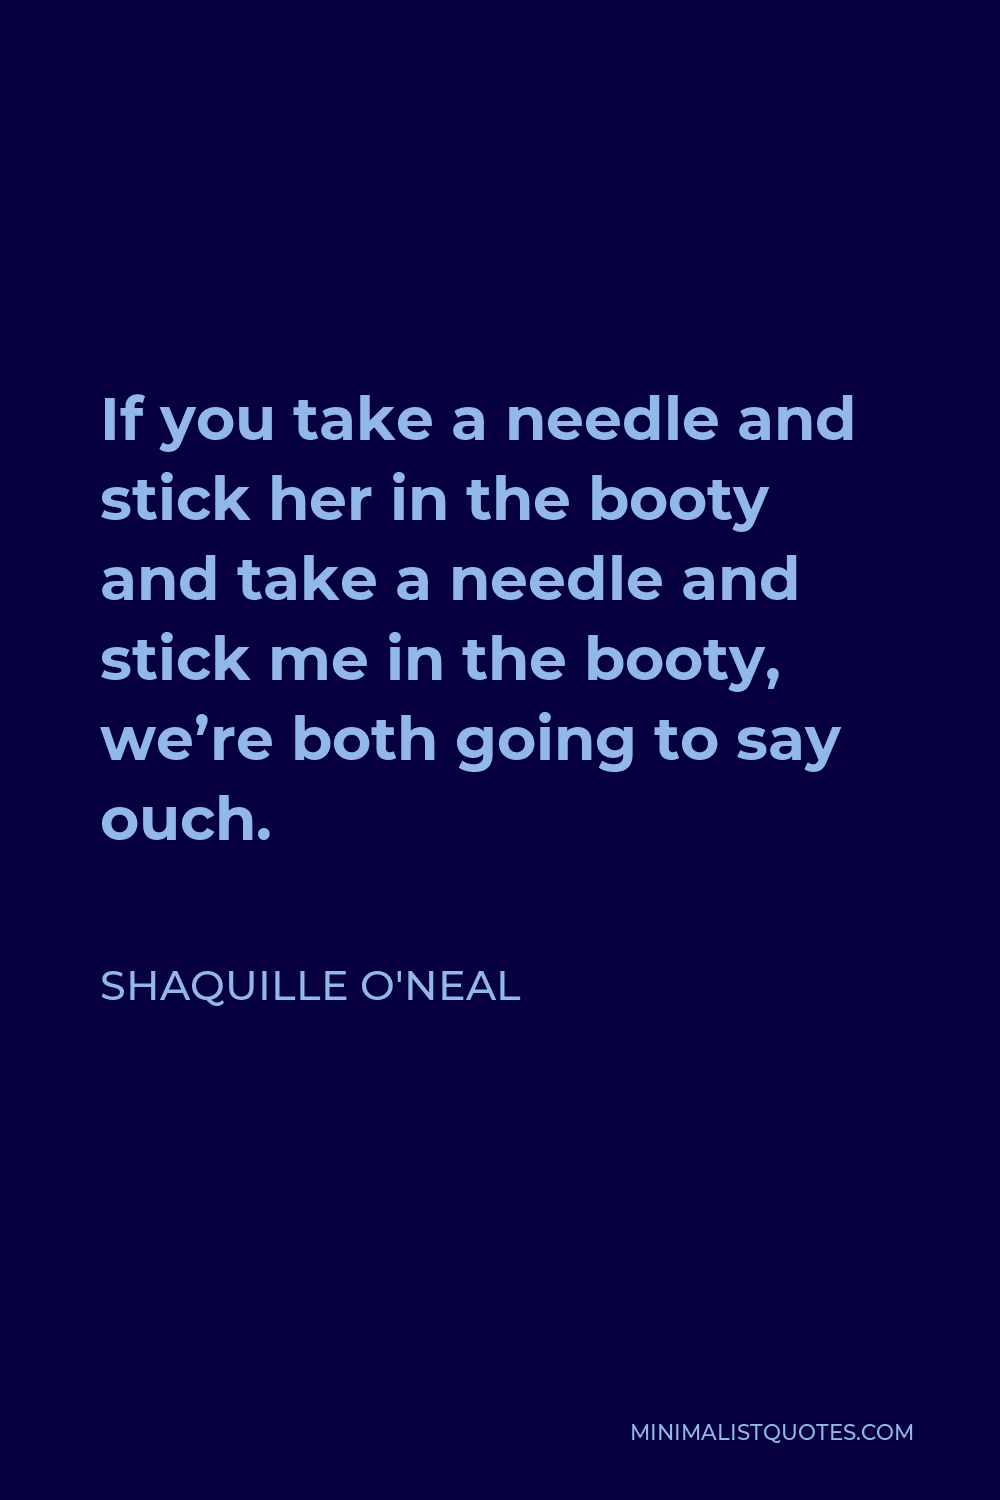 Shaquille O'Neal Quote - If you take a needle and stick her in the booty and take a needle and stick me in the booty, we’re both going to say ouch.